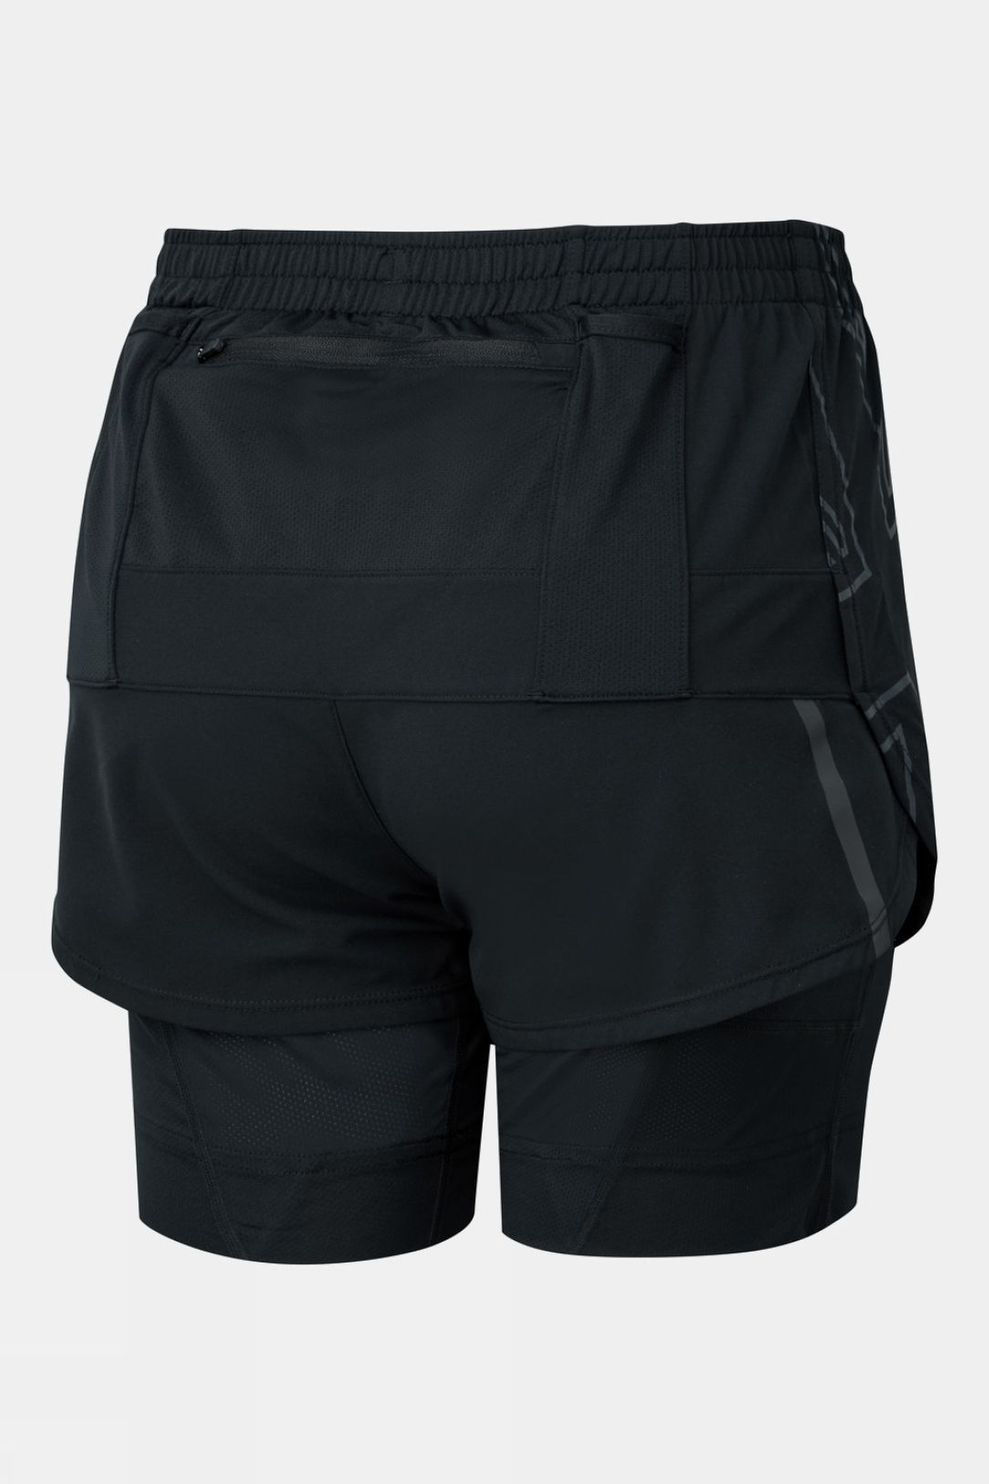 WOMENS TECH MARATHON TWIN SHORT@Fastandligh ch for the nice price back